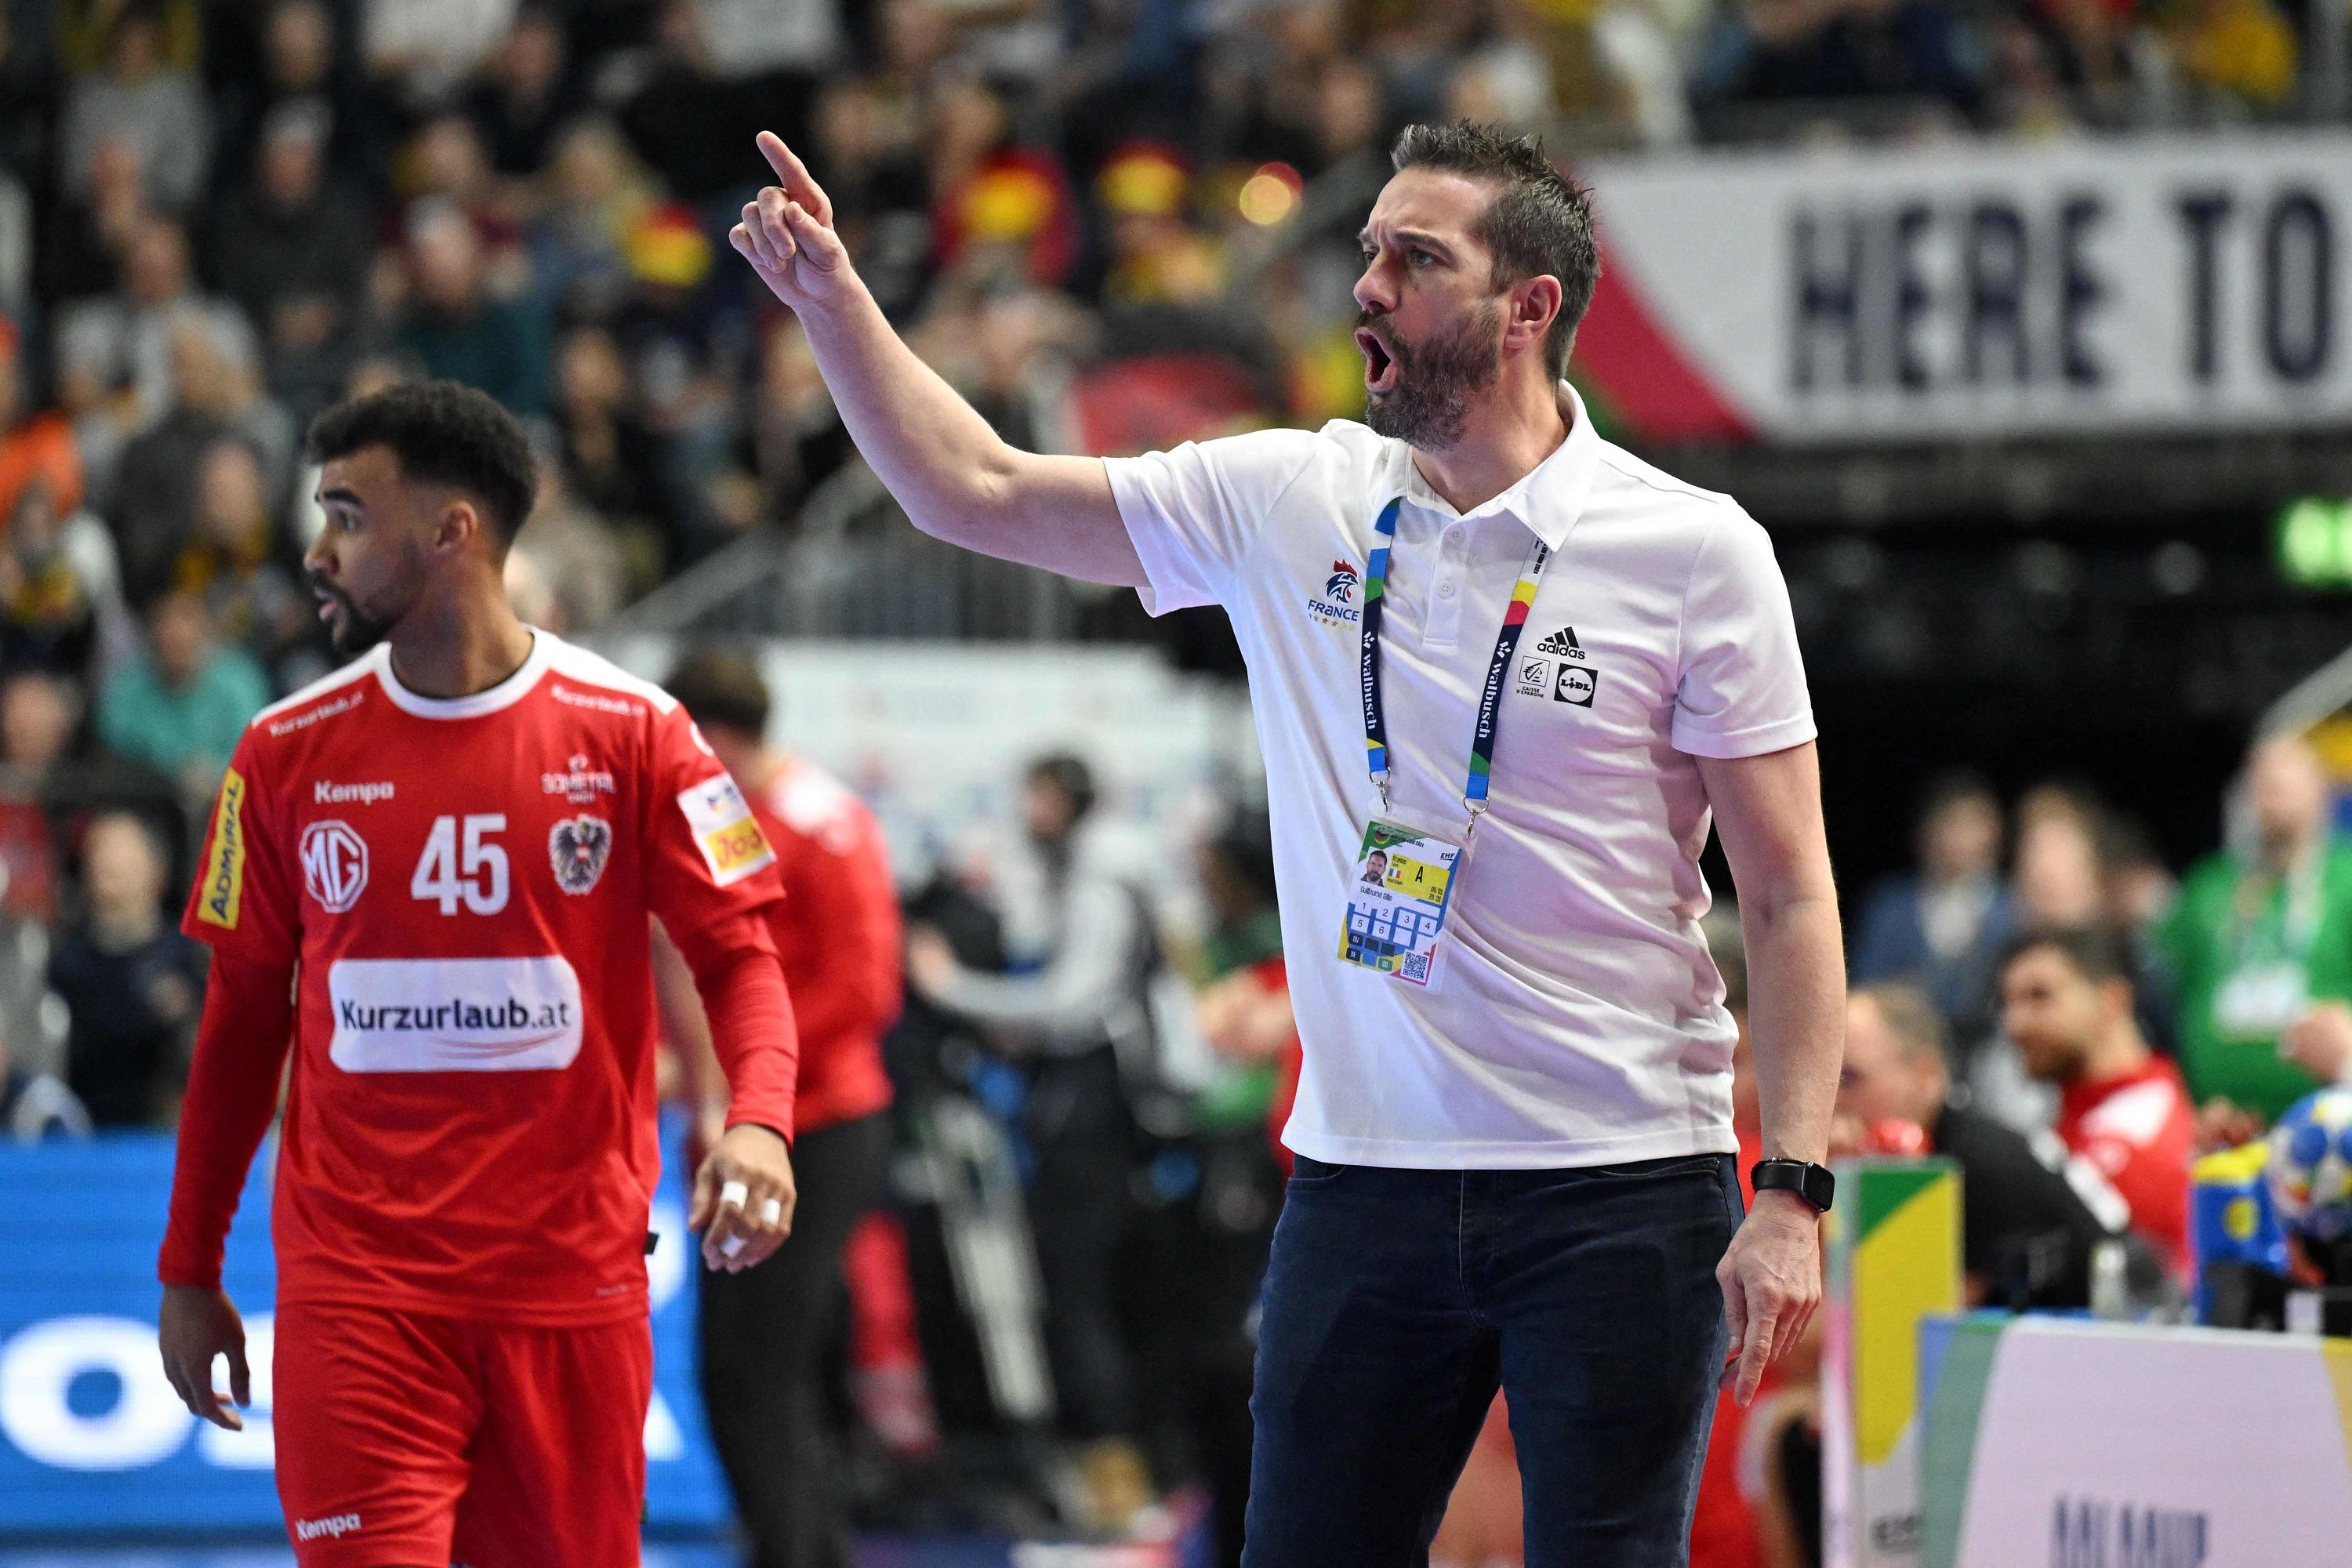 Euro handball: “It places us as a reference team in the international concert”, swears Guillaume Gille